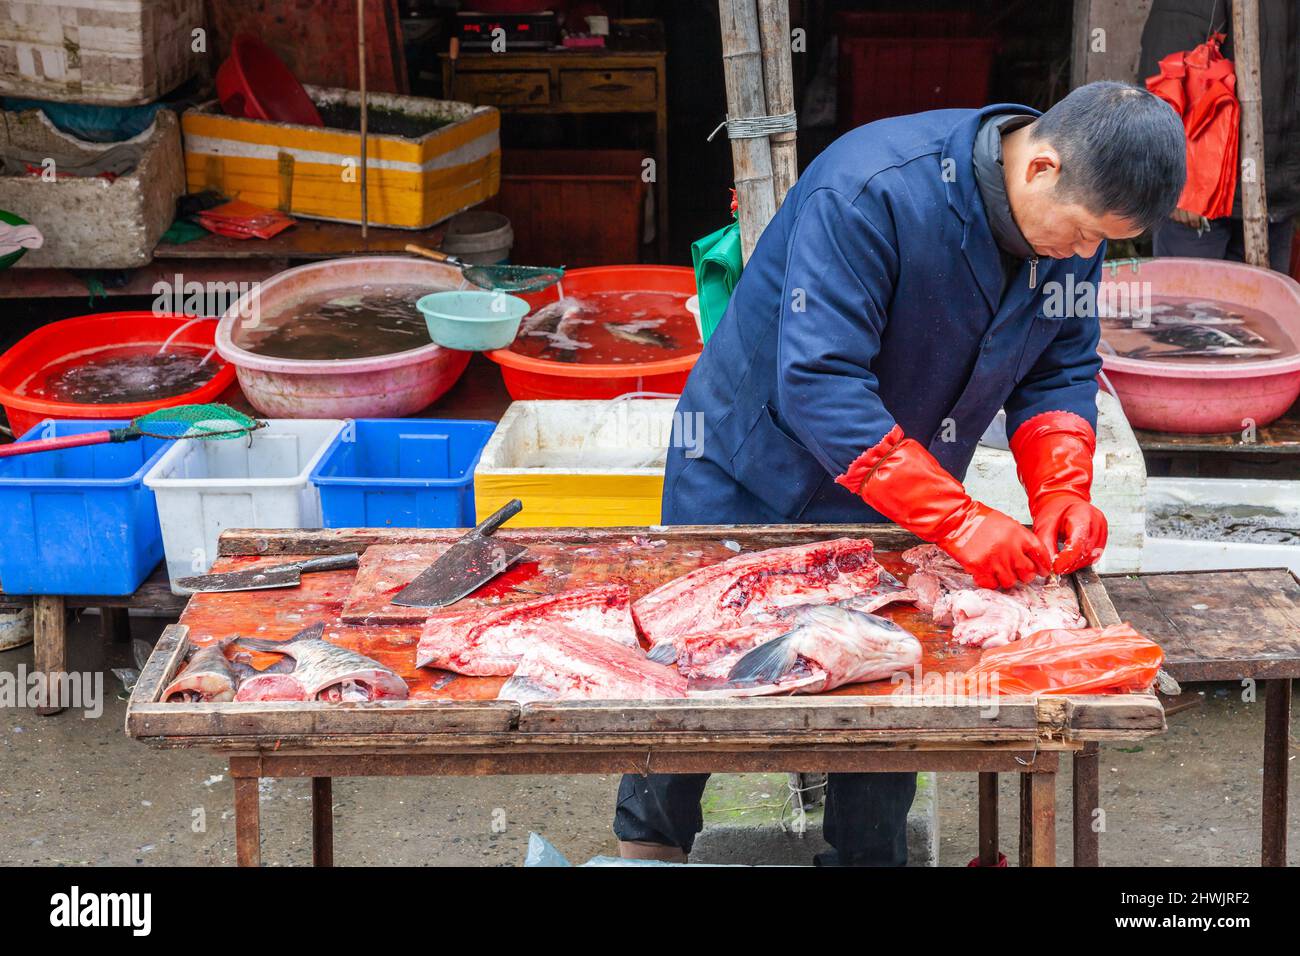 Fishmonger cleaning fish for sale in a market in Jiashan, China Stock Photo